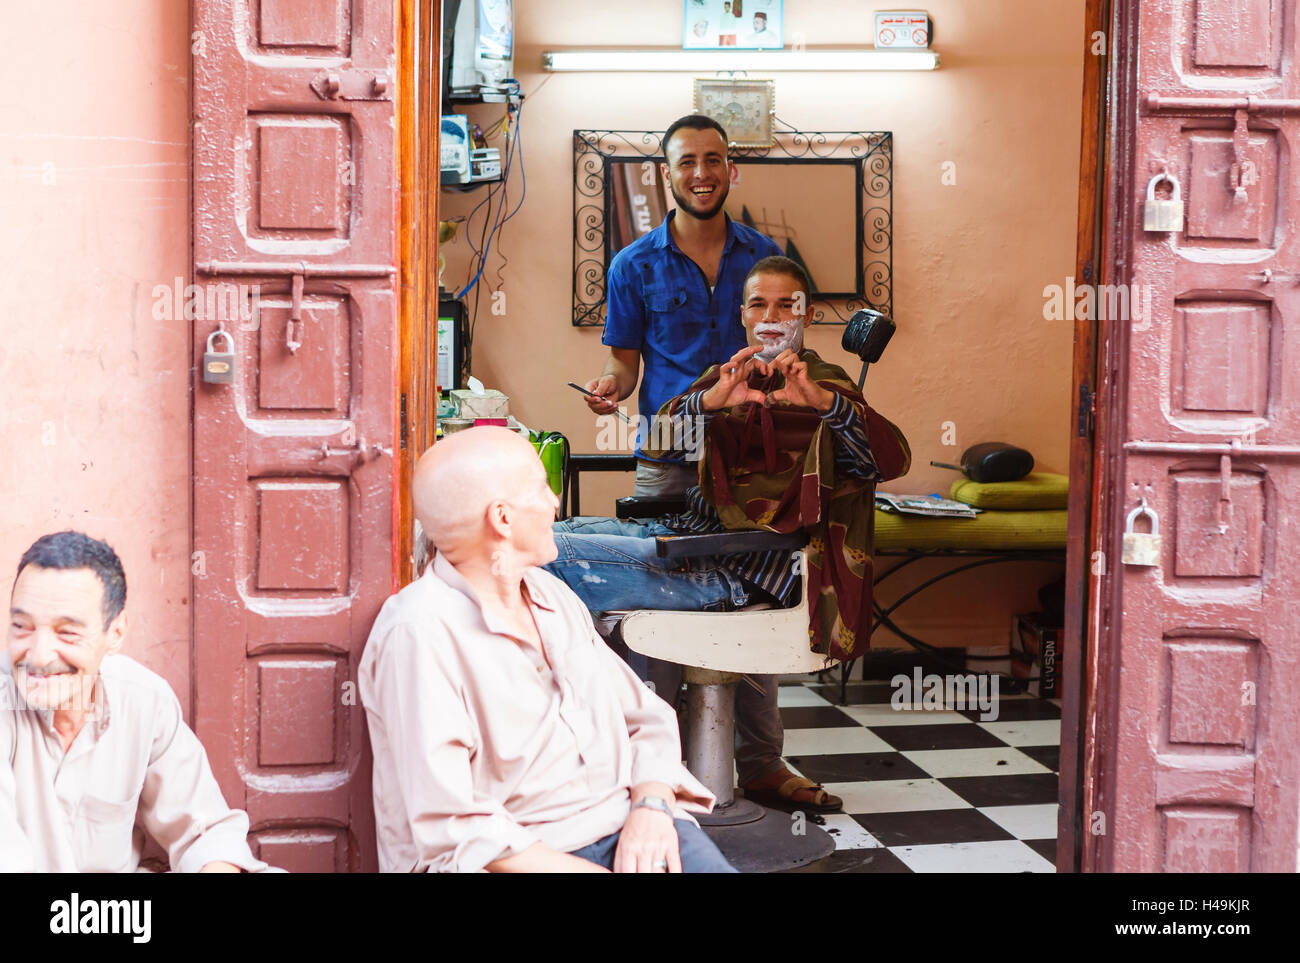 Friendly people in barber shop on the streets of Marrakesh, Morocco Stock Photo